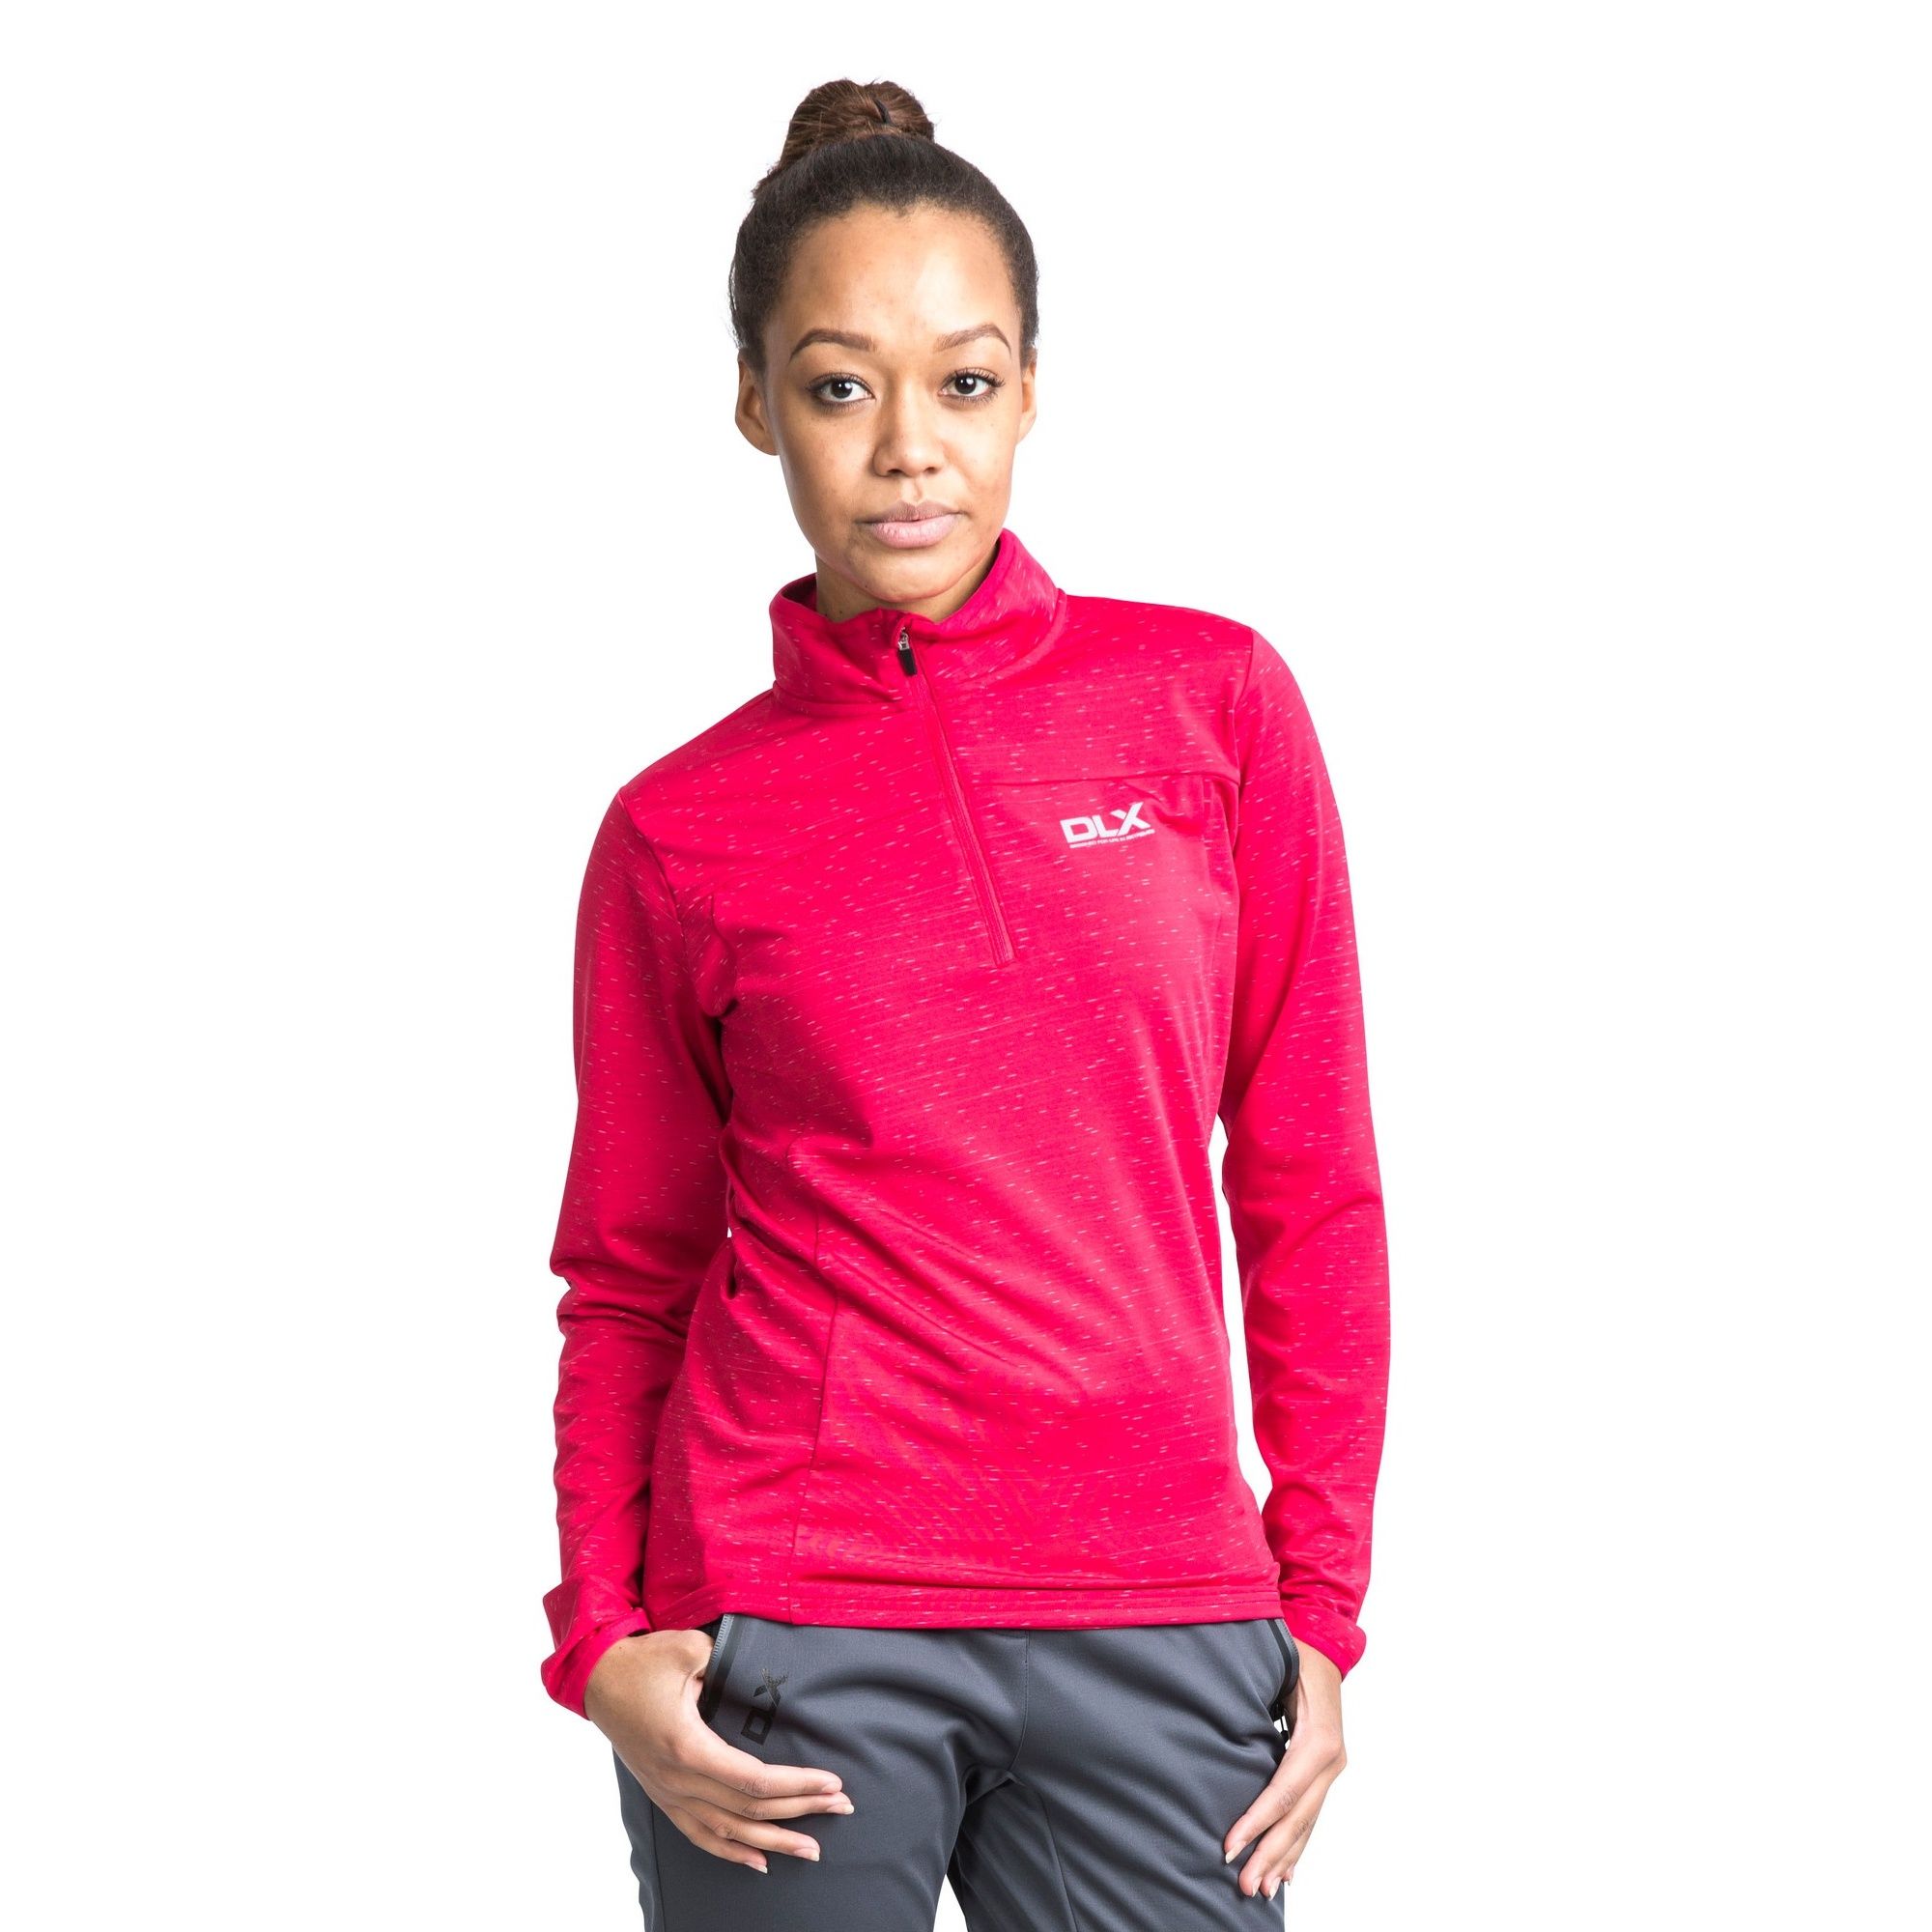 1/2 zip neck. Long sleeves. Zip with stripe detail. Stretch binding at cuff and neck. Quick dry. 88% Polyester/12% Elastane. Trespass Womens Chest Sizing (approx): XS/8 - 32in/81cm, S/10 - 34in/86cm, M/12 - 36in/91.4cm, L/14 - 38in/96.5cm, XL/16 - 40in/101.5cm, XXL/18 - 42in/106.5cm.